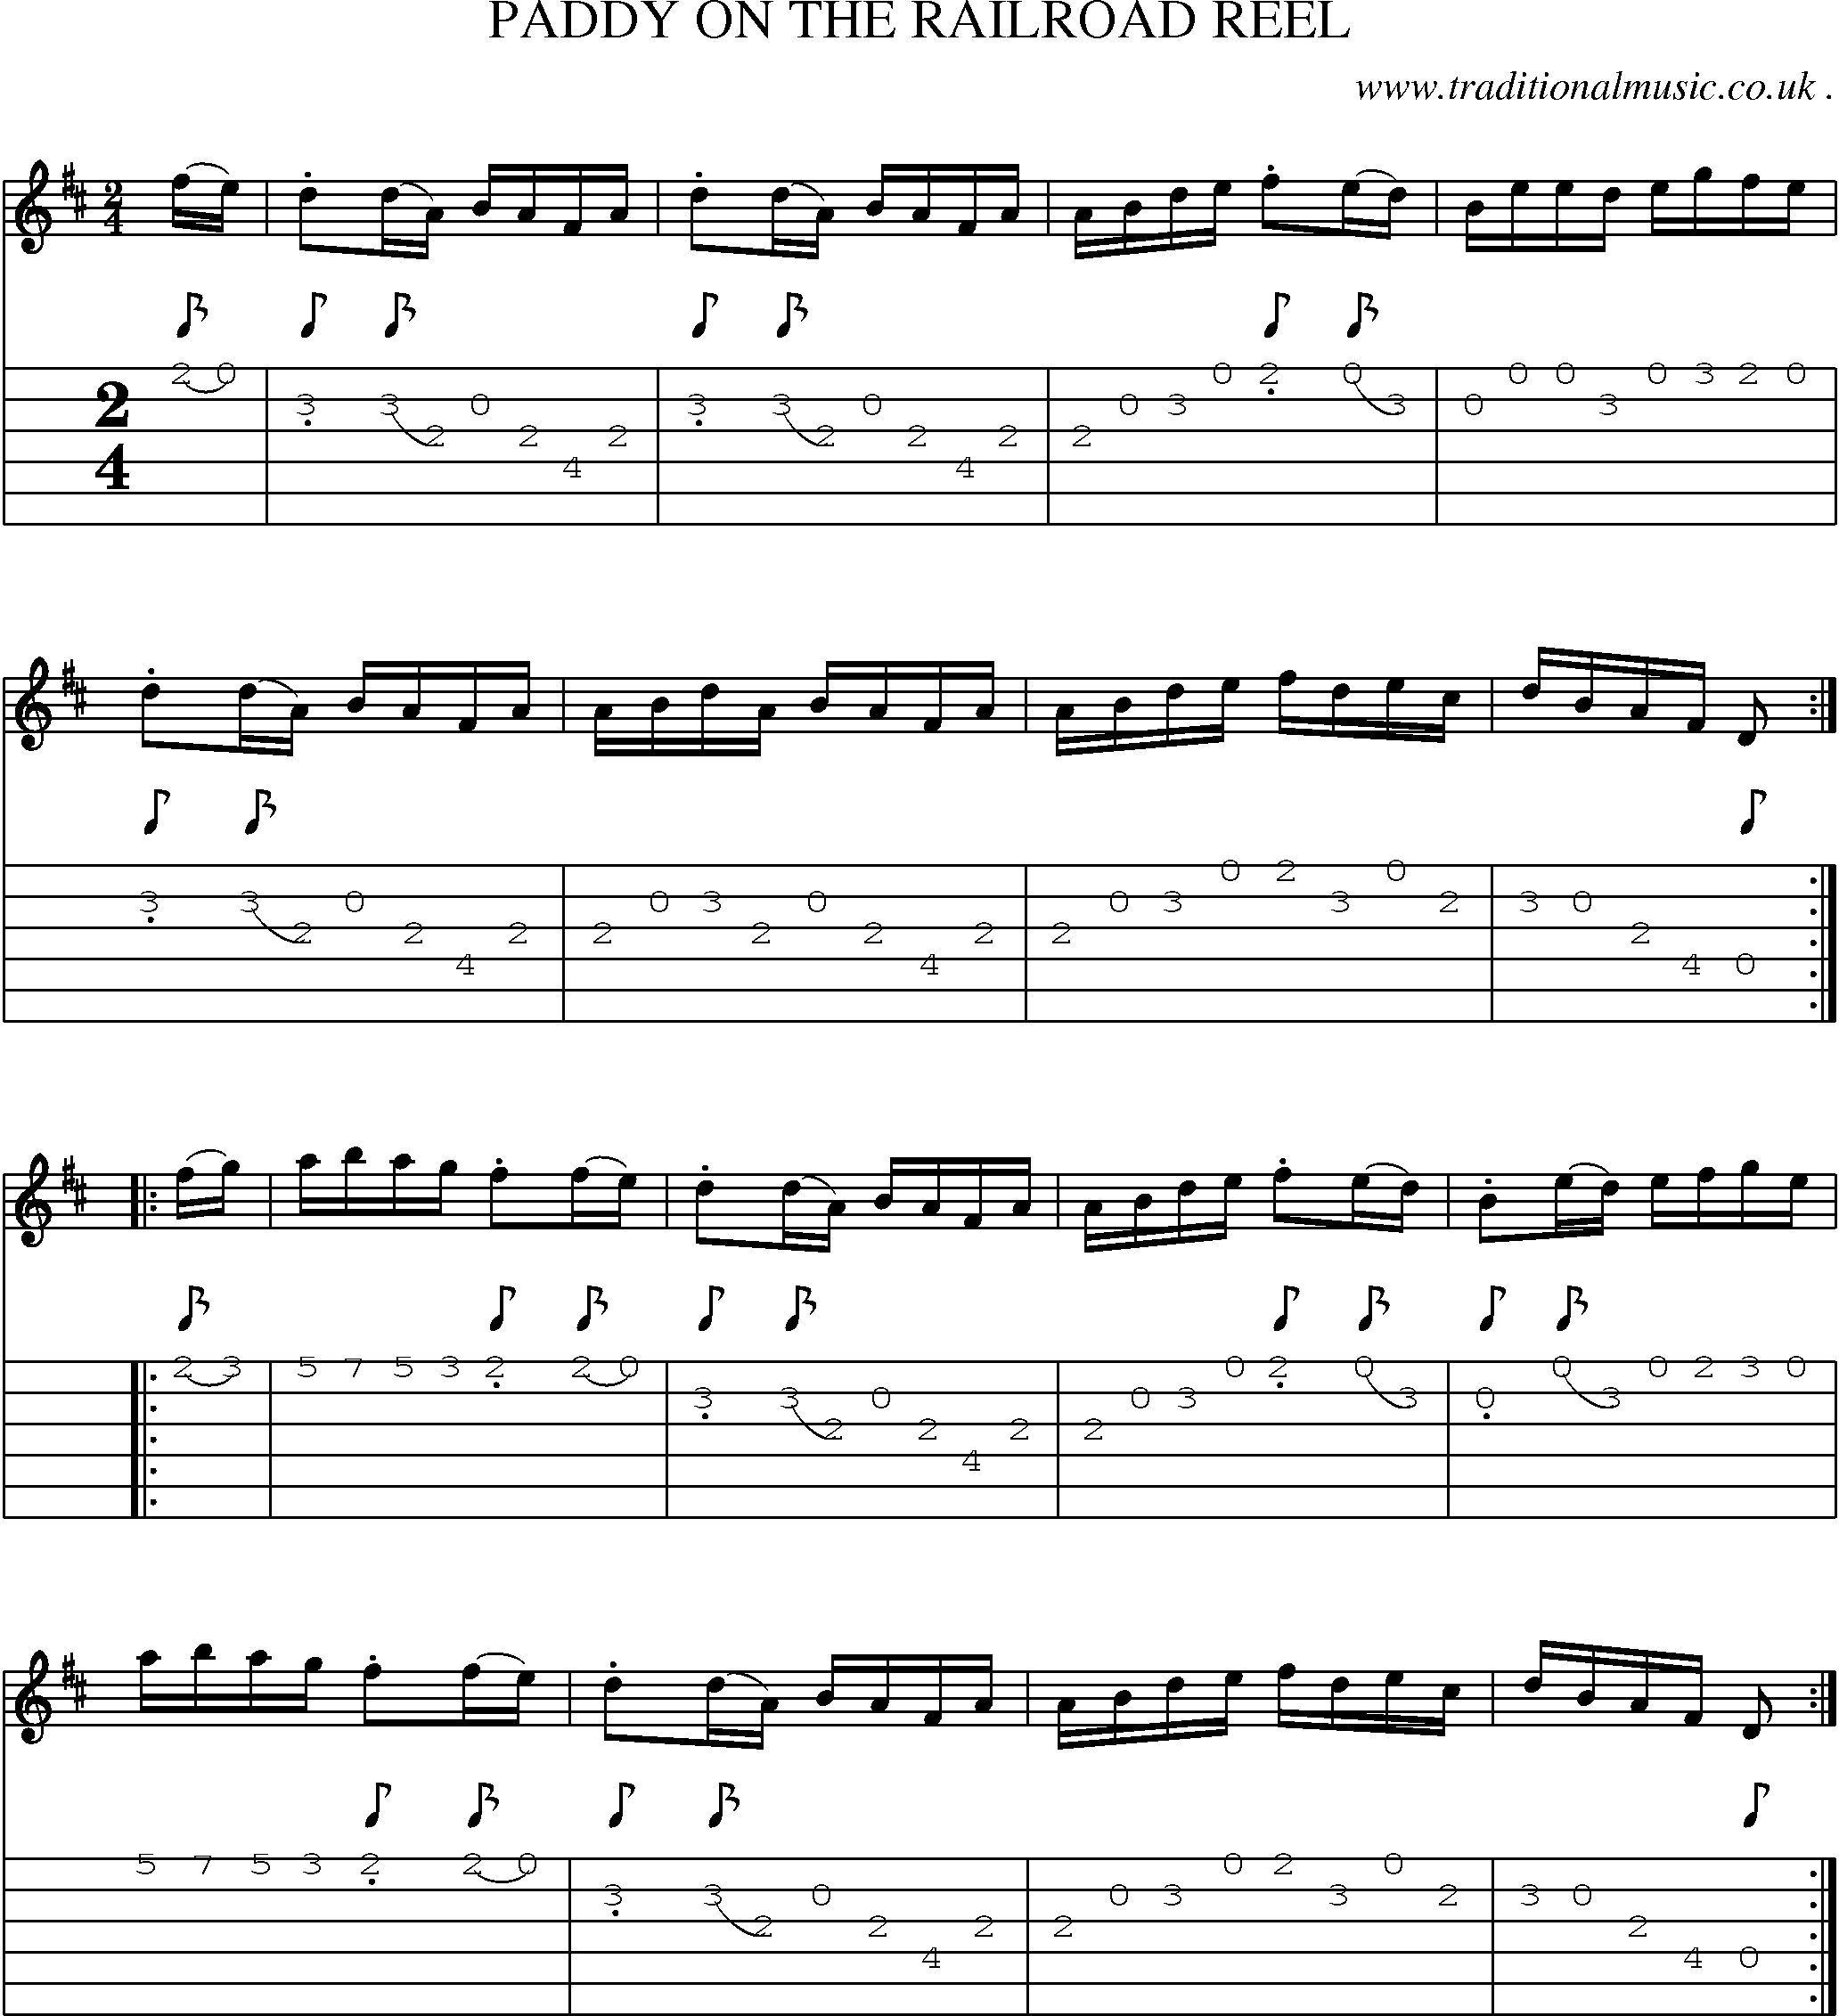 Sheet-Music and Guitar Tabs for Paddy On The Railroad Reel